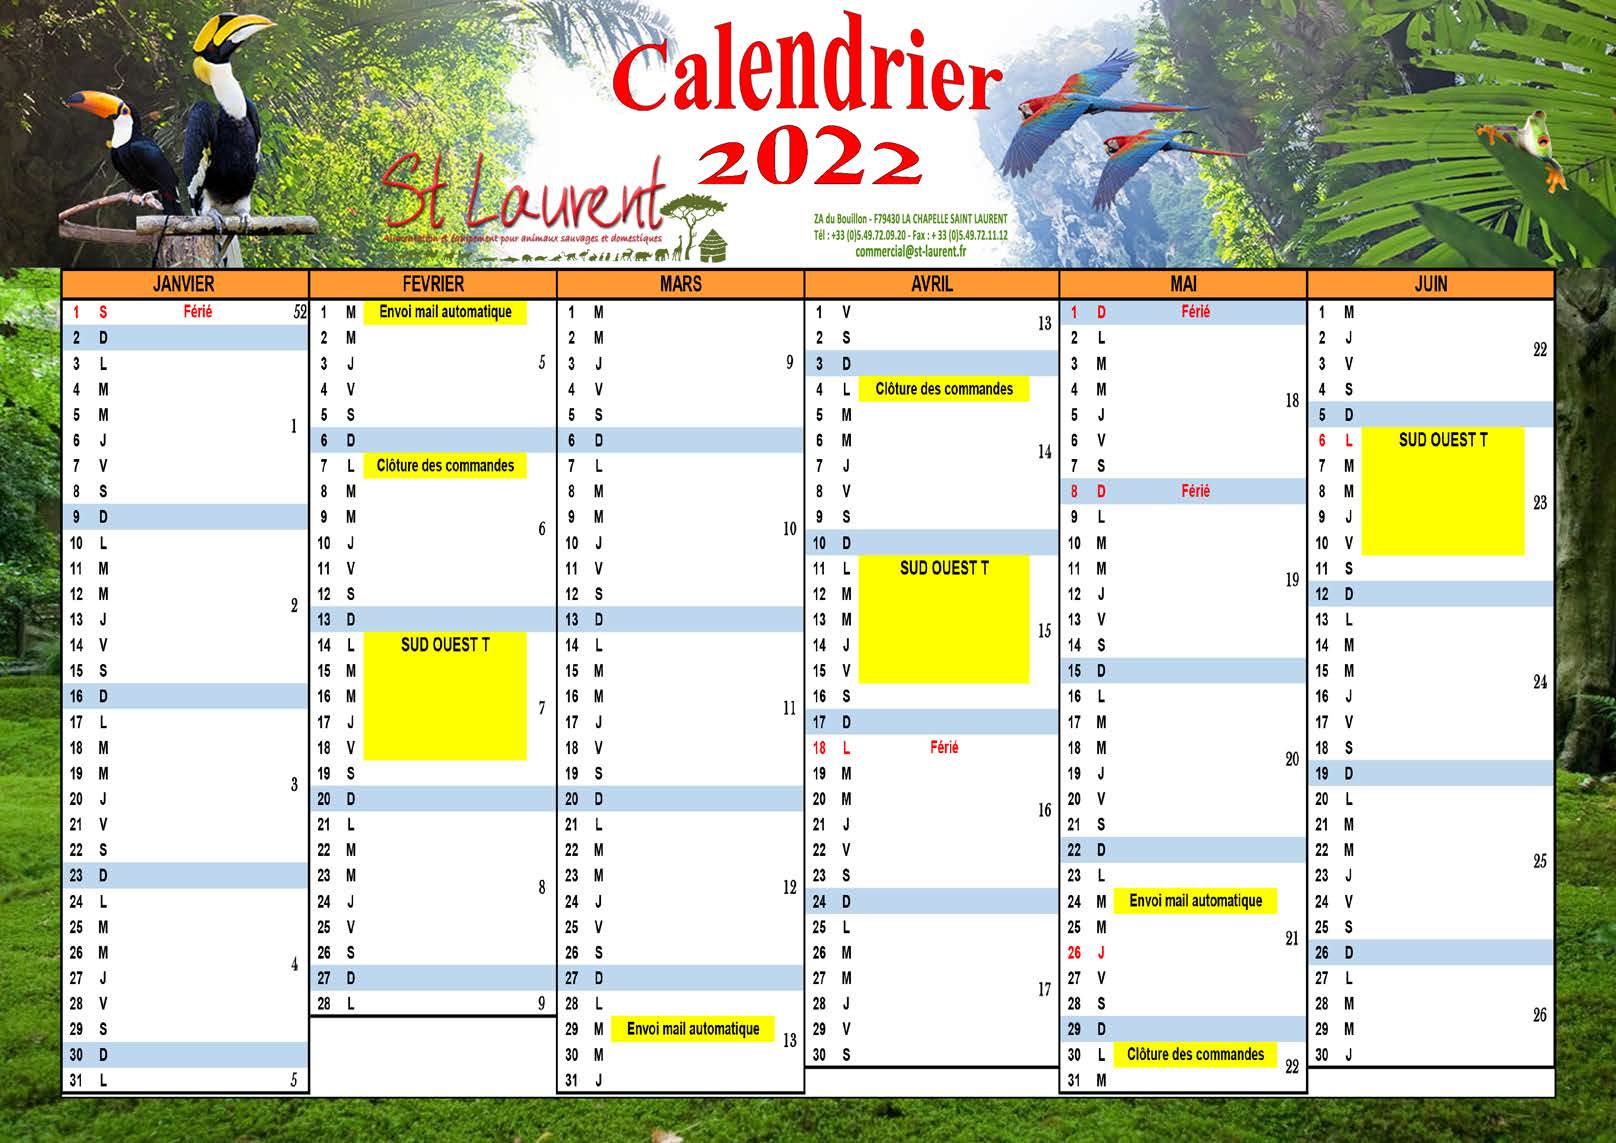 CALENDRIER SUD OUEST T 2022.jpg